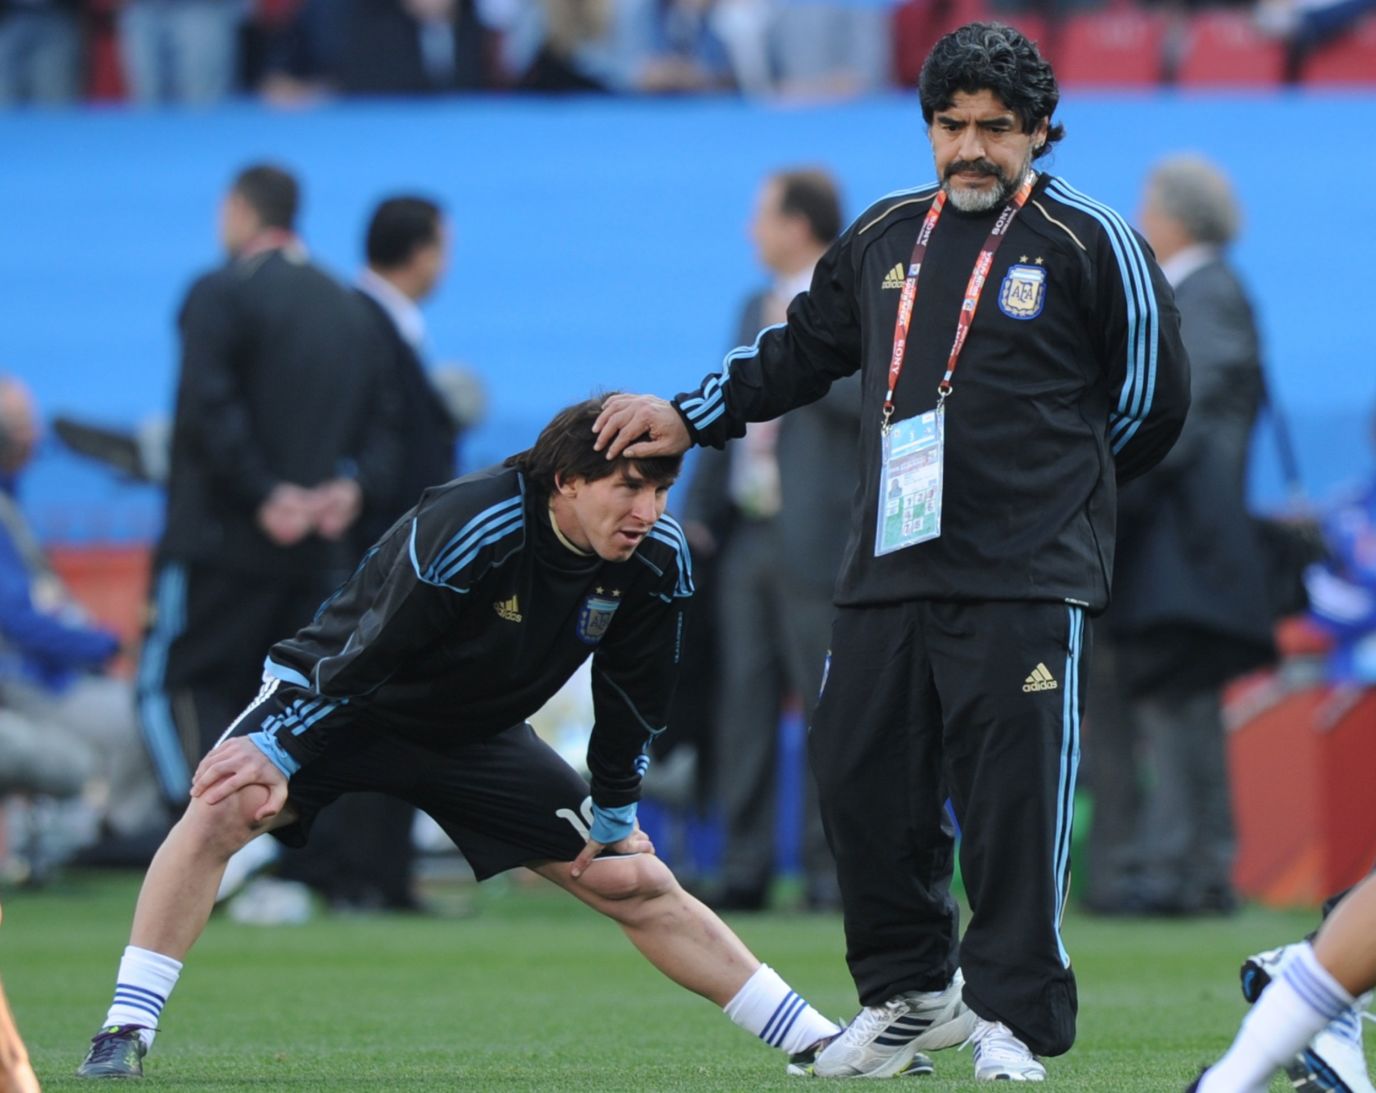 <a href="http://www.cnn.com/2020/11/25/football/gallery/diego-maradona/index.html" target="_blank">Argentina legend Diego Maradona</a> touches Messi's head prior to a World Cup match in South Africa in 2010. Maradona was Argentina's coach for the tournament. Argentina lost to Germany in the quarterfinals, just as it did in 2006.